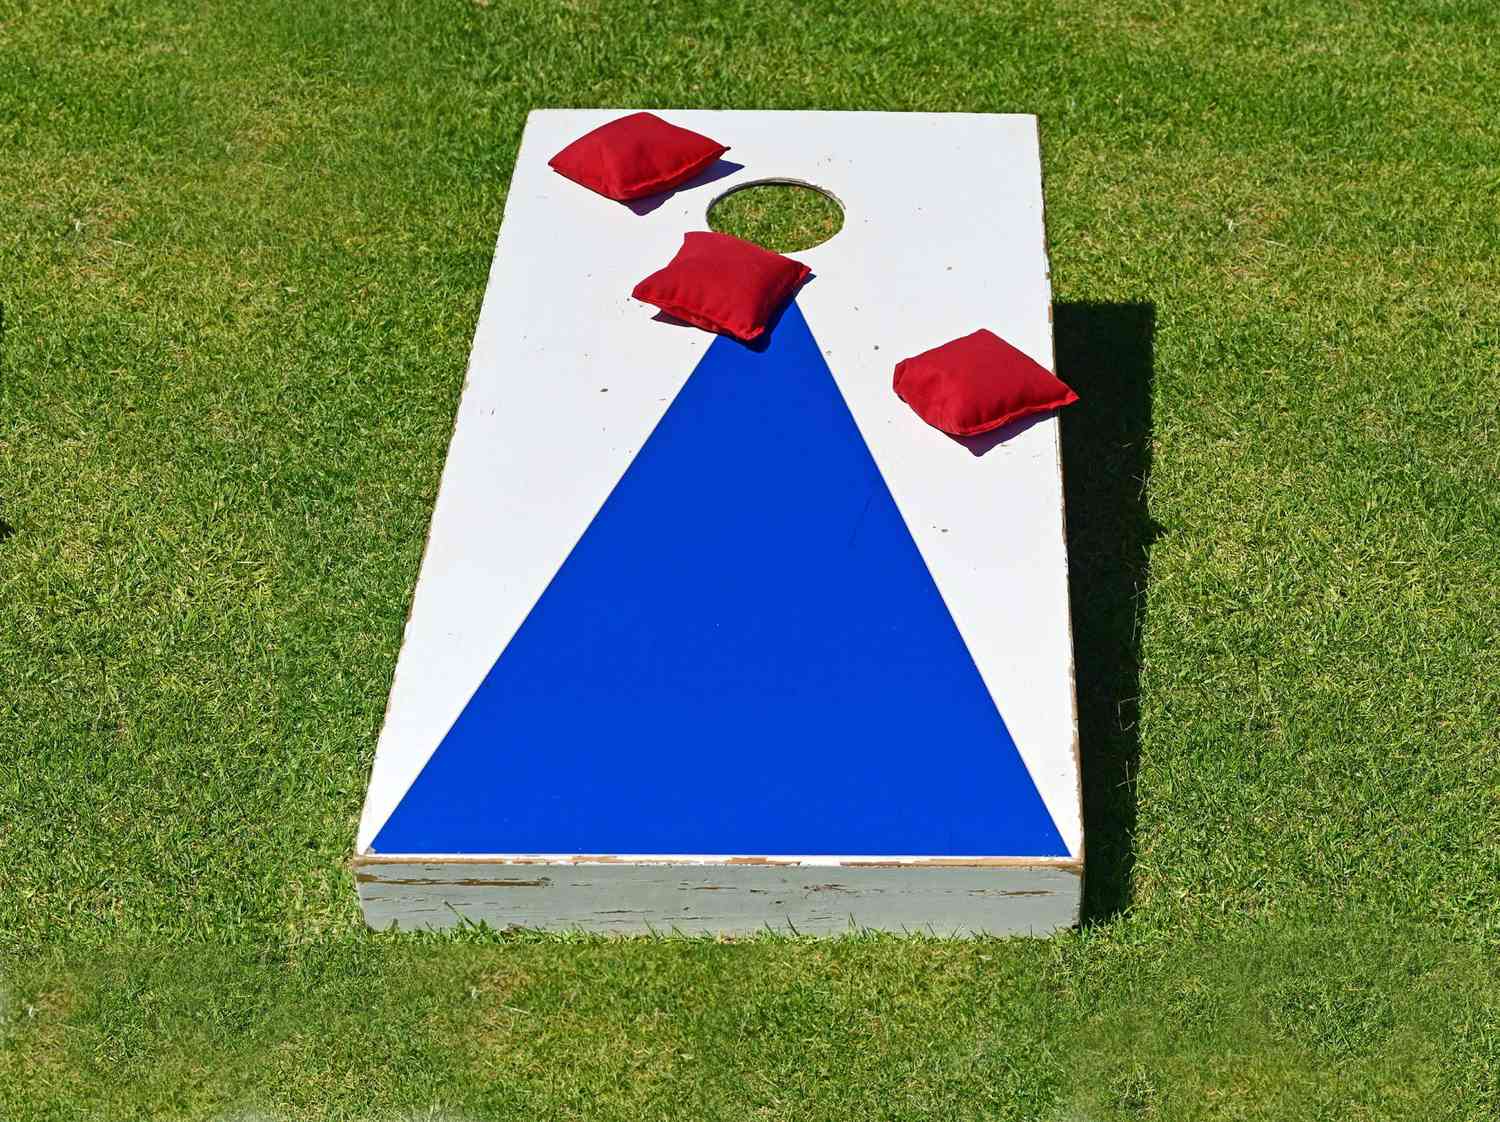 Outdoor aiming target game corn hole